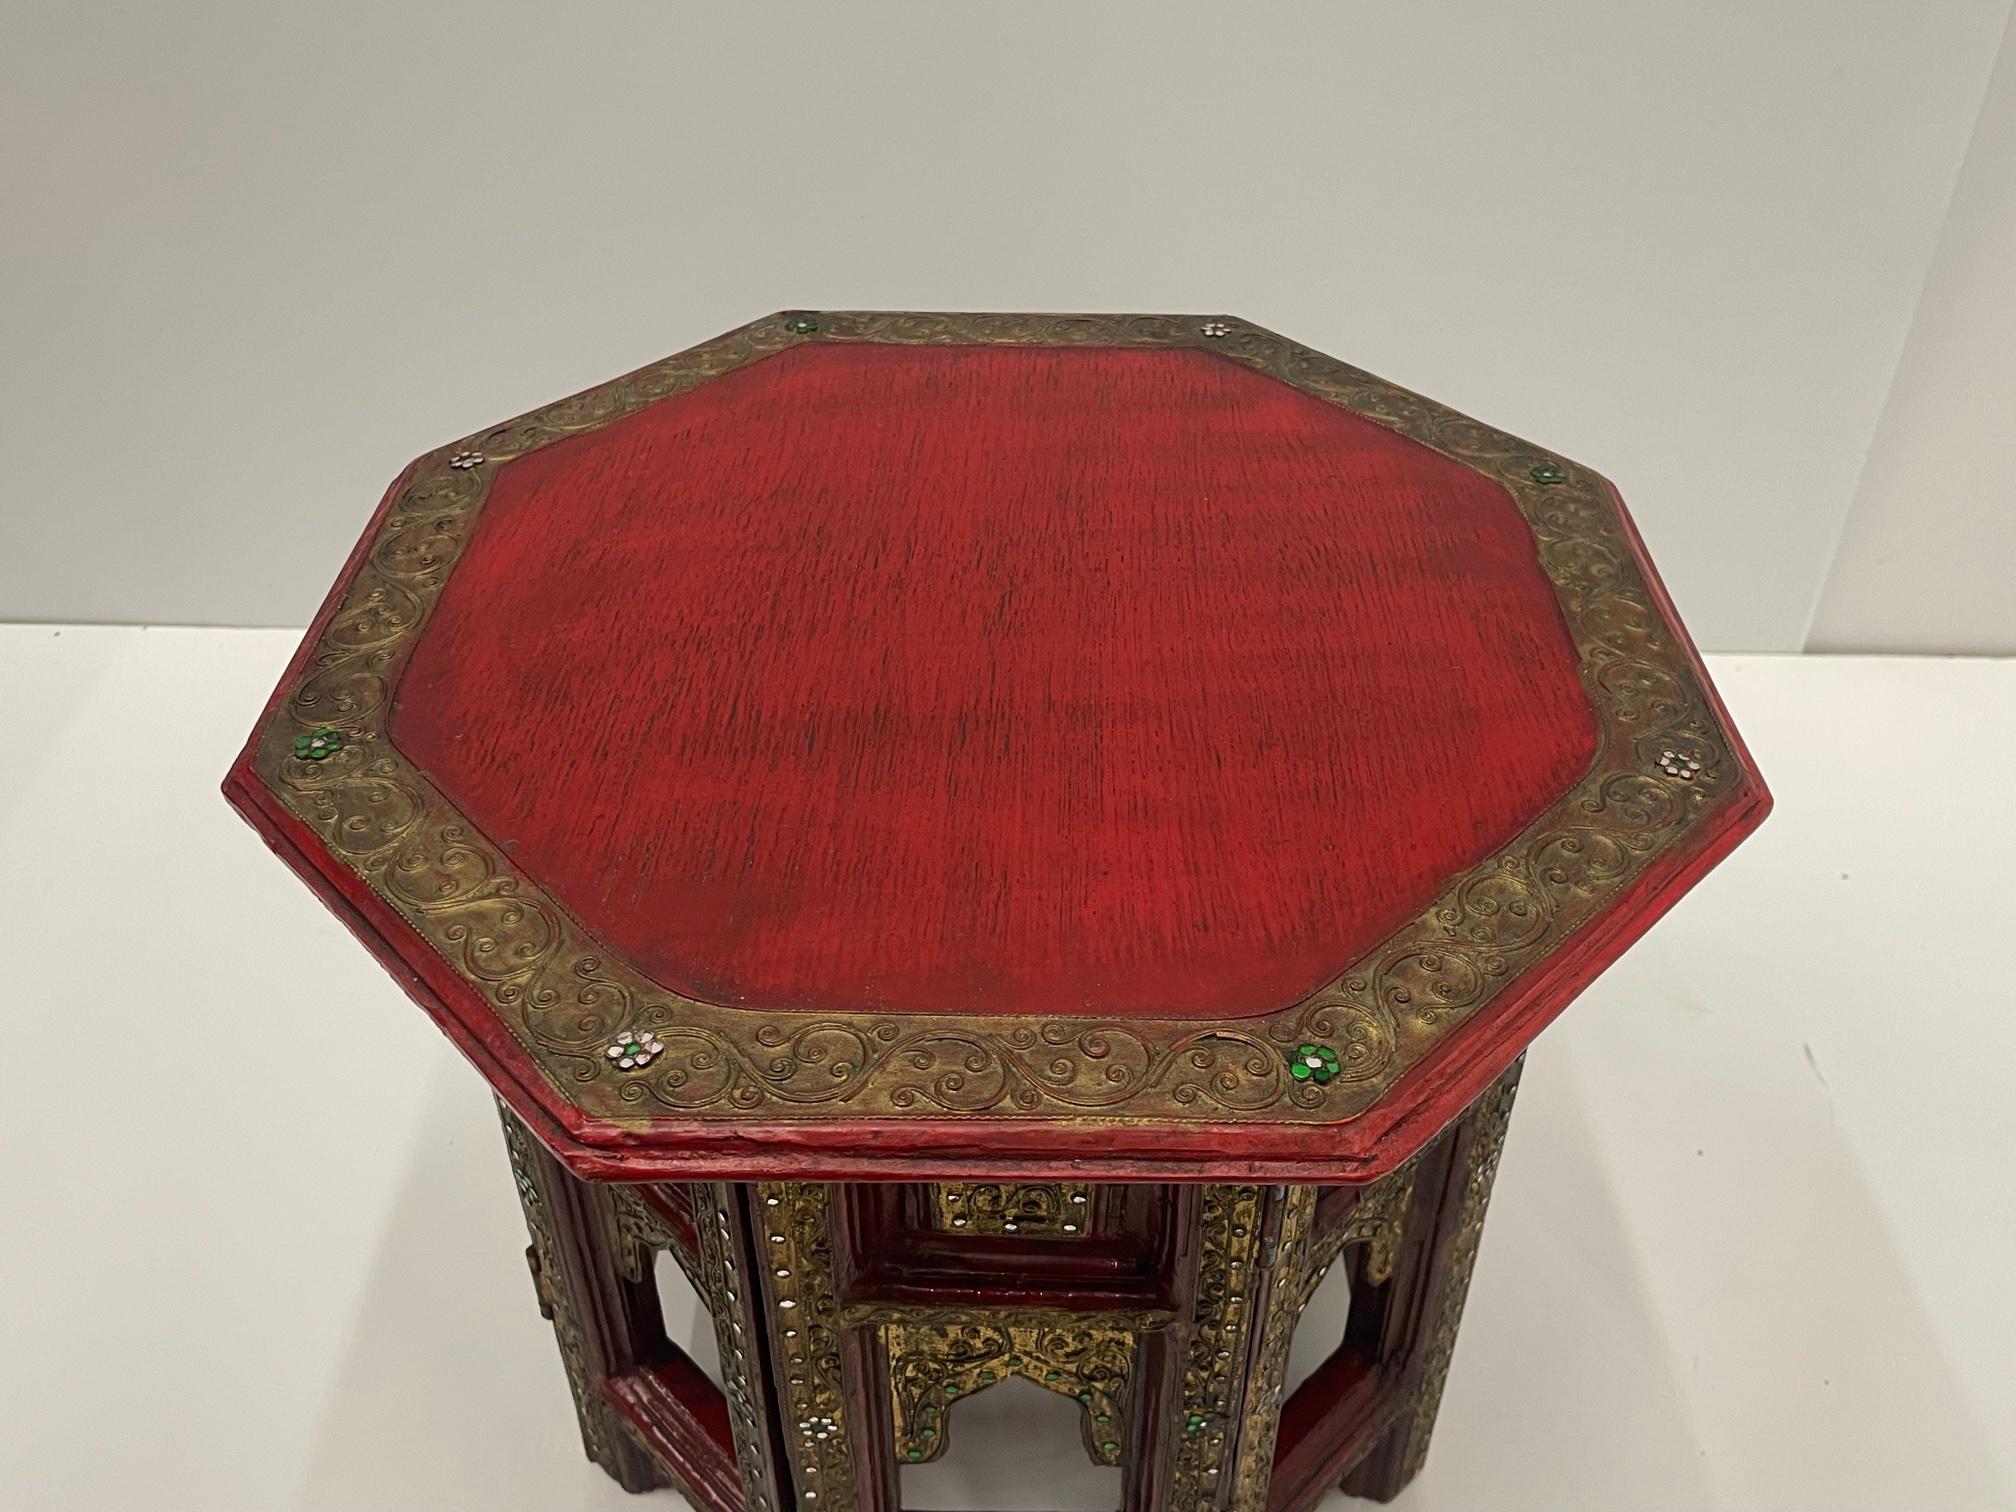 Striking and glamorous Moroccan side table having a red painted octagonal top, carved folding base embellished with glass inset beads, floral decoration and gilding.